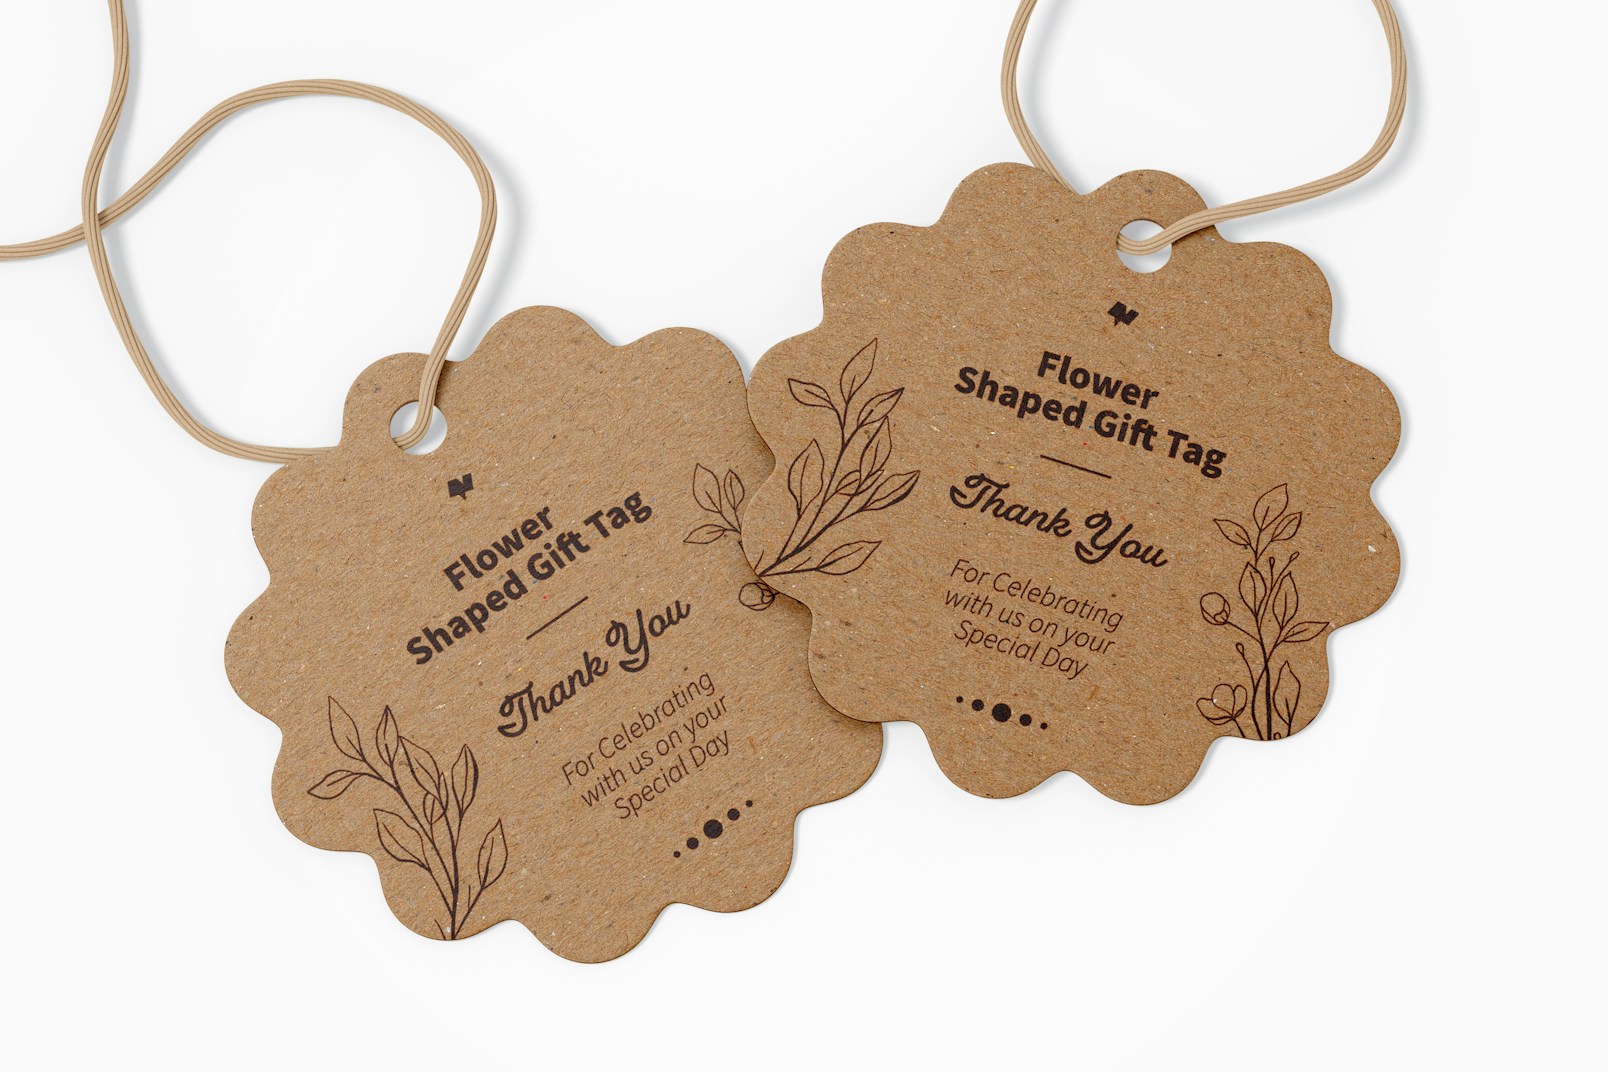 Flower Shaped Gift Tags Mockup